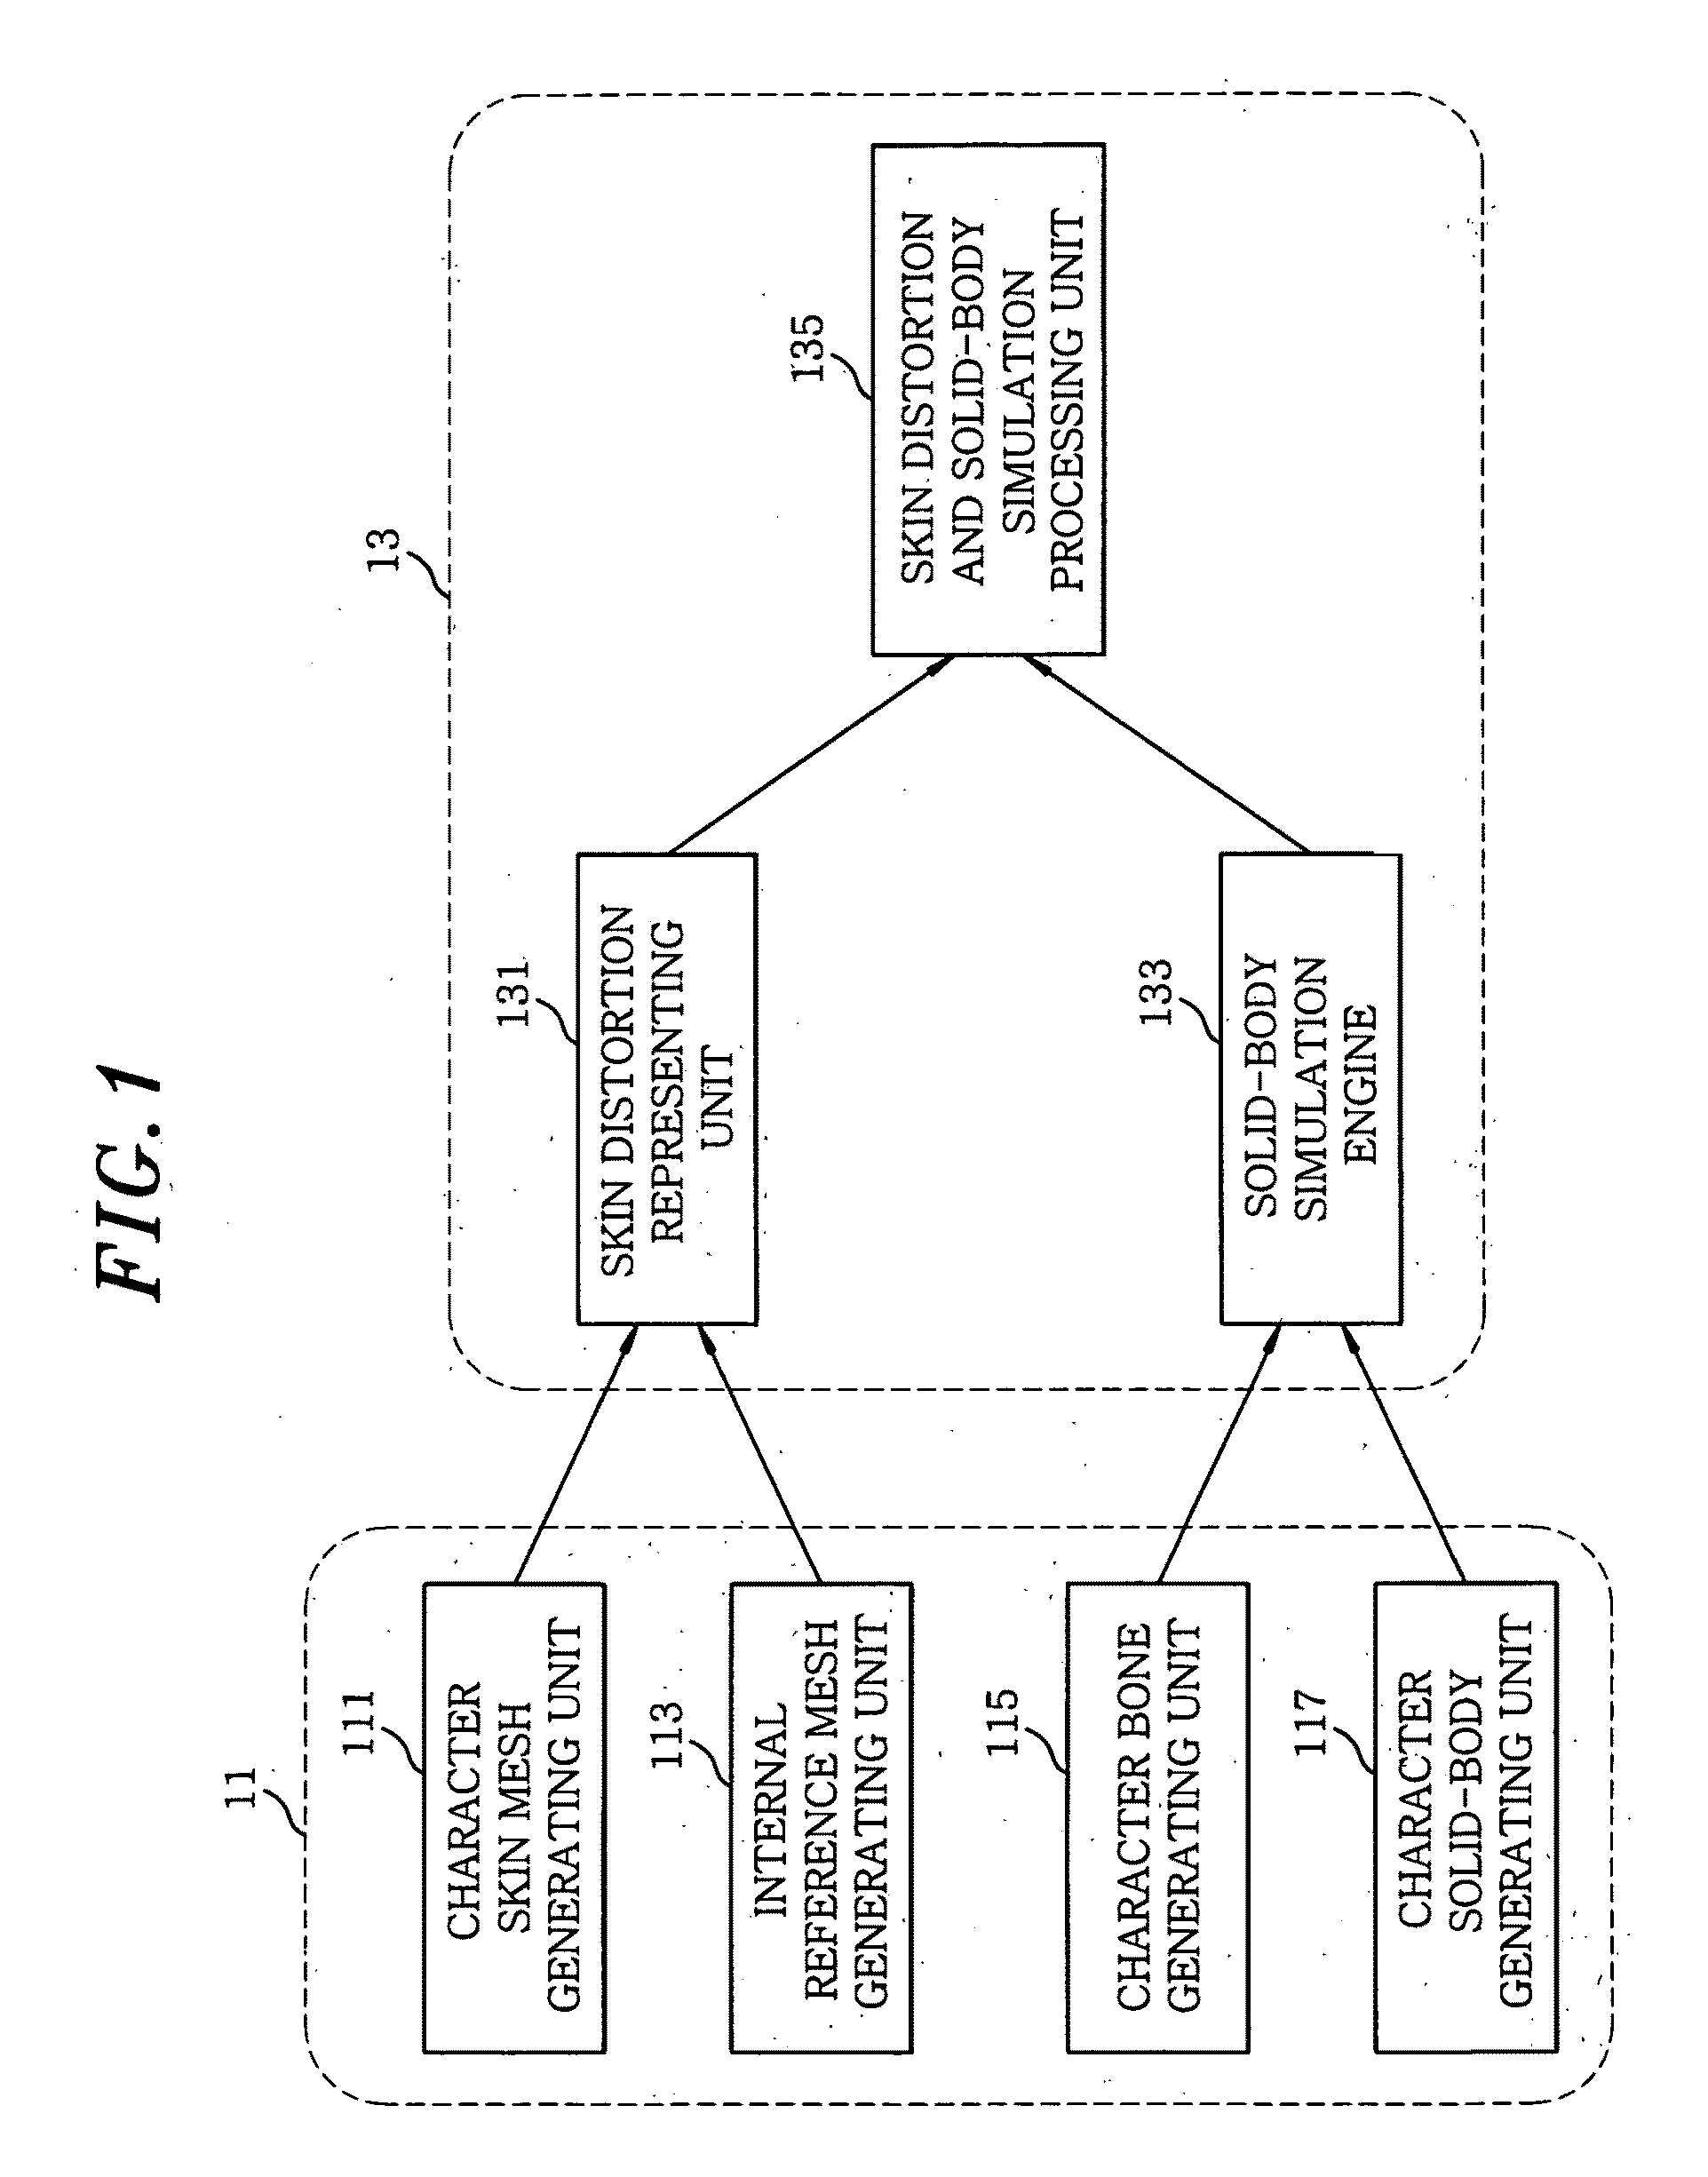 Character animation system and method